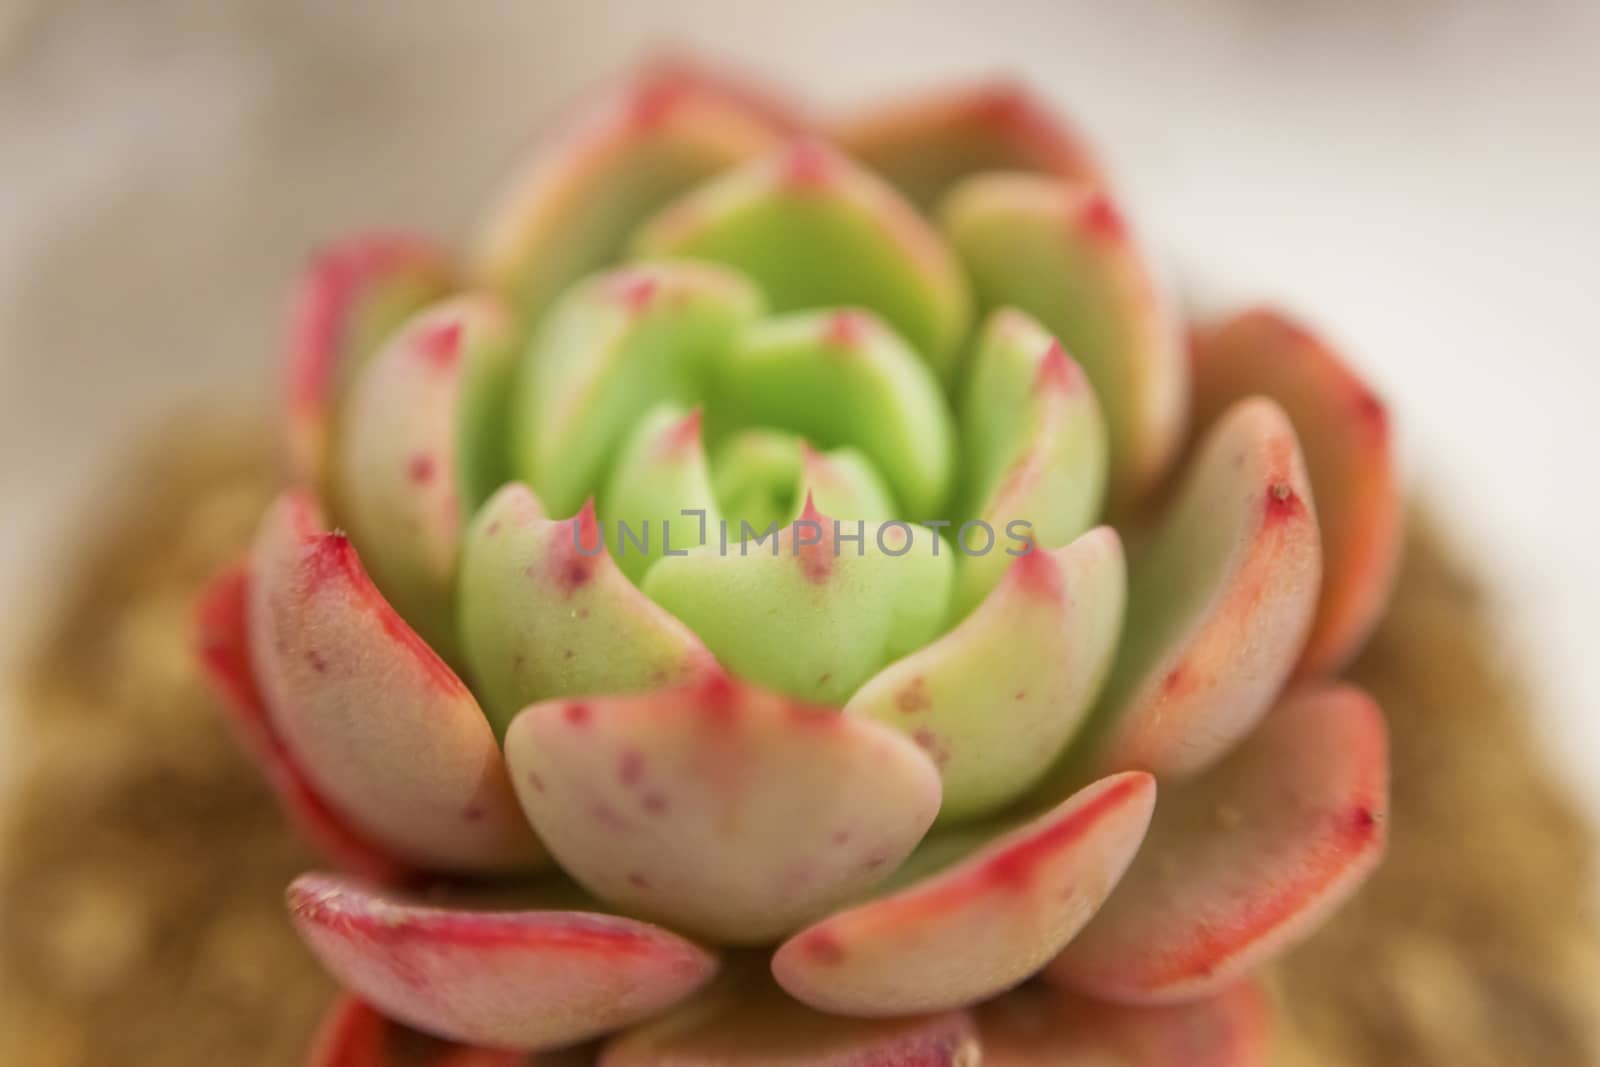 .Close-up of an Echeveria succulent with pink and green pointed leaves. by galinasharapova